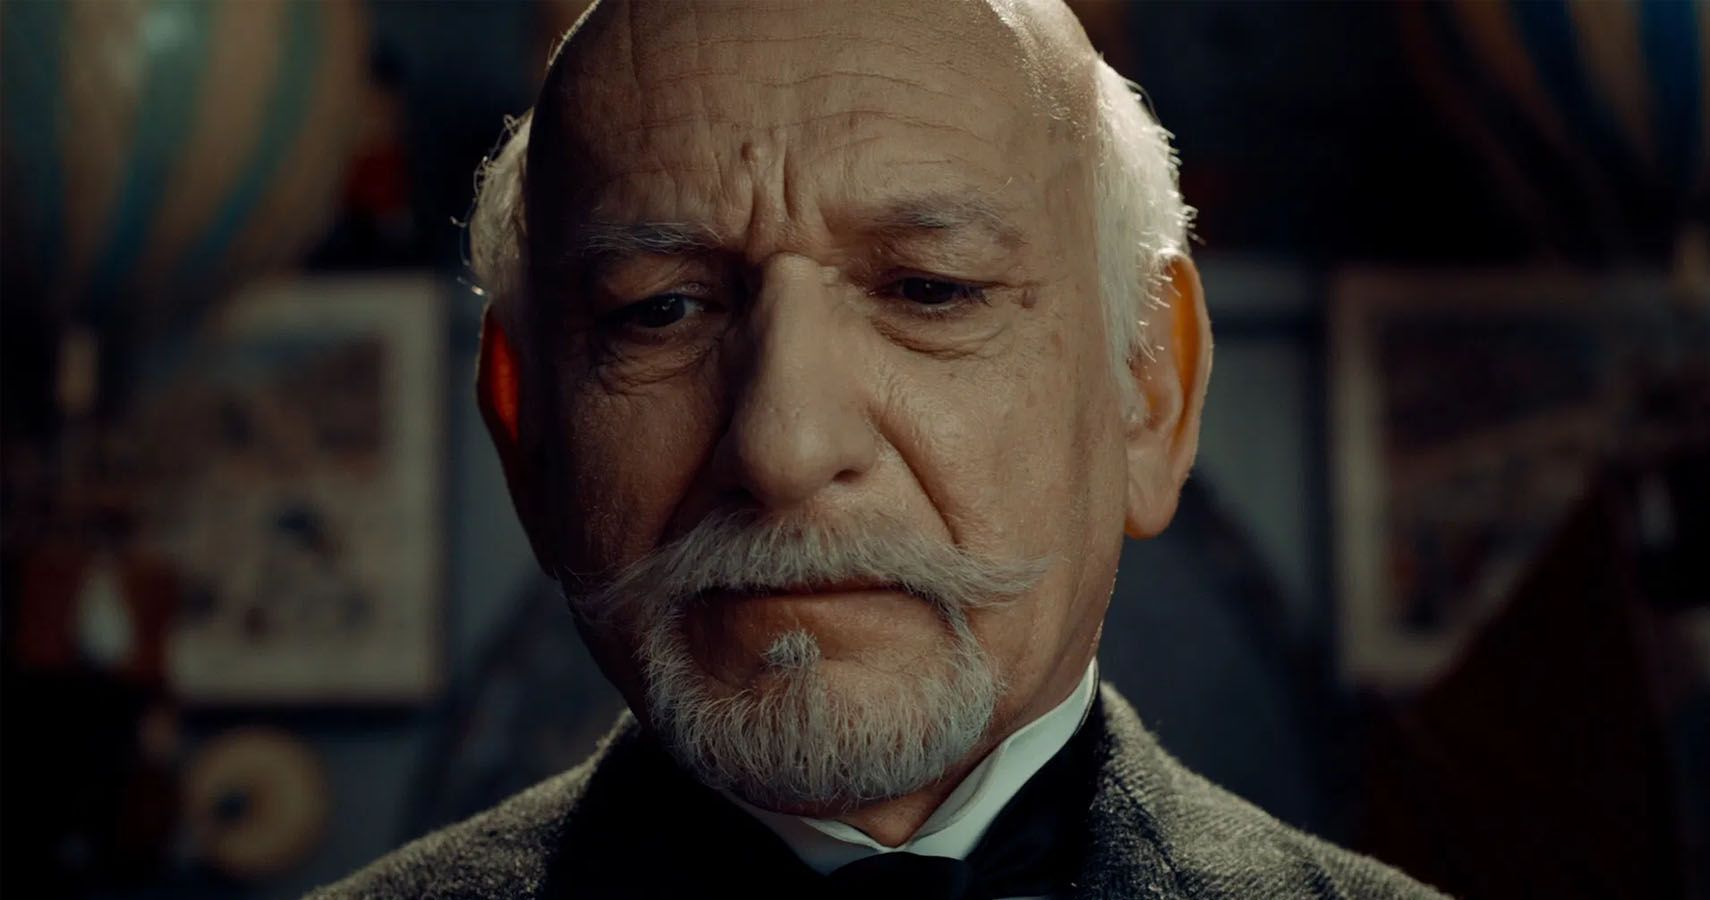 Ben Kingsley's 10 Best Movies, According To Rotten Tomatoes